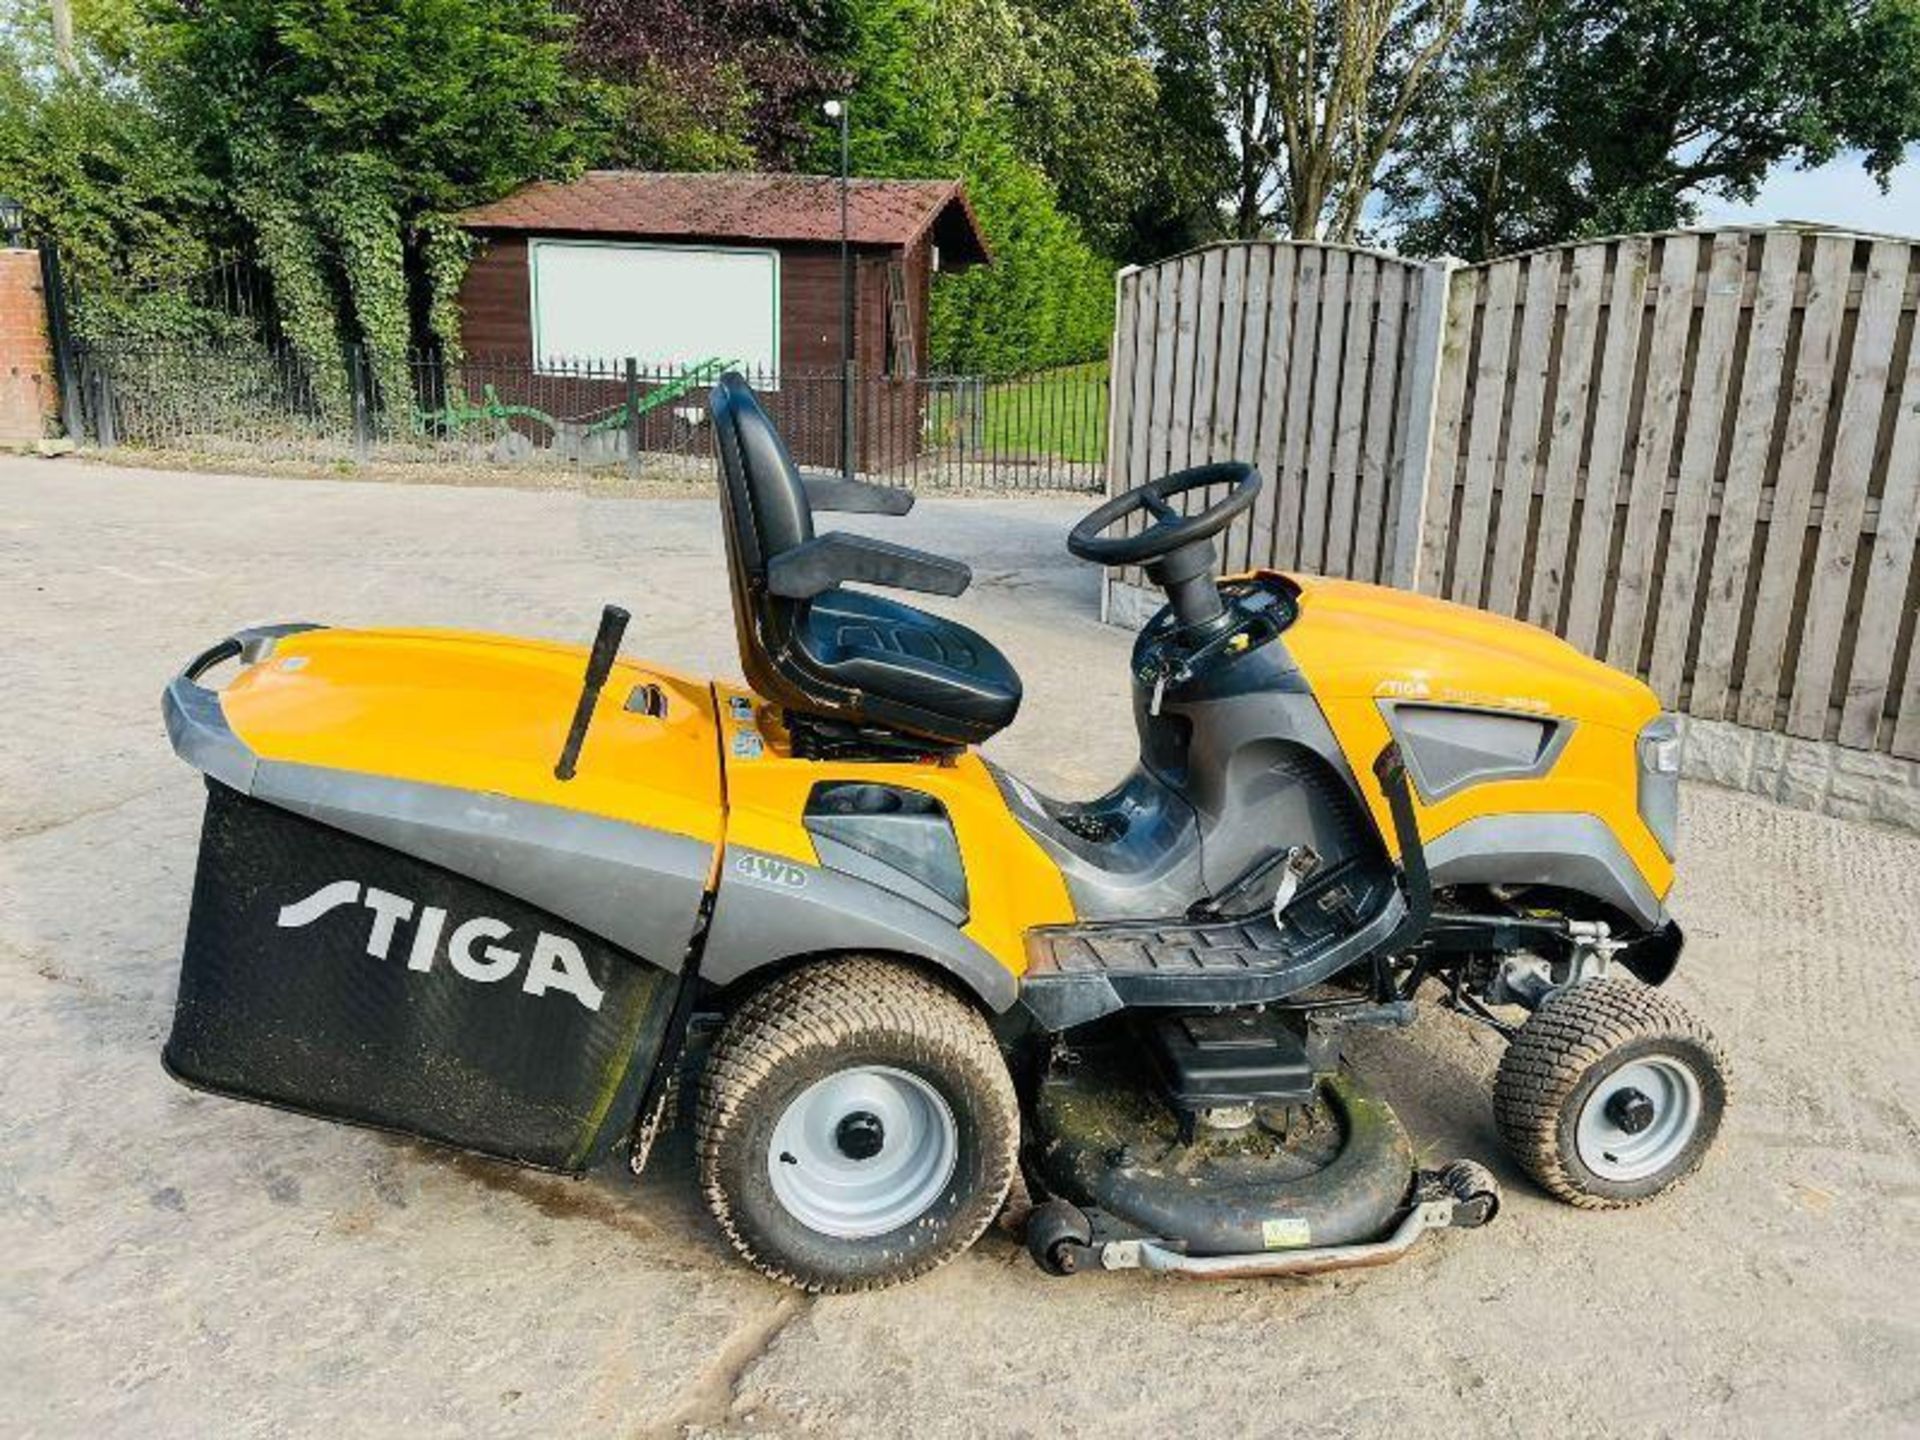 STIGA 4WD RIDE ON MOWER *YEAR 2016, 240 HOURS* C/W COLLECTION BOX - Image 10 of 12